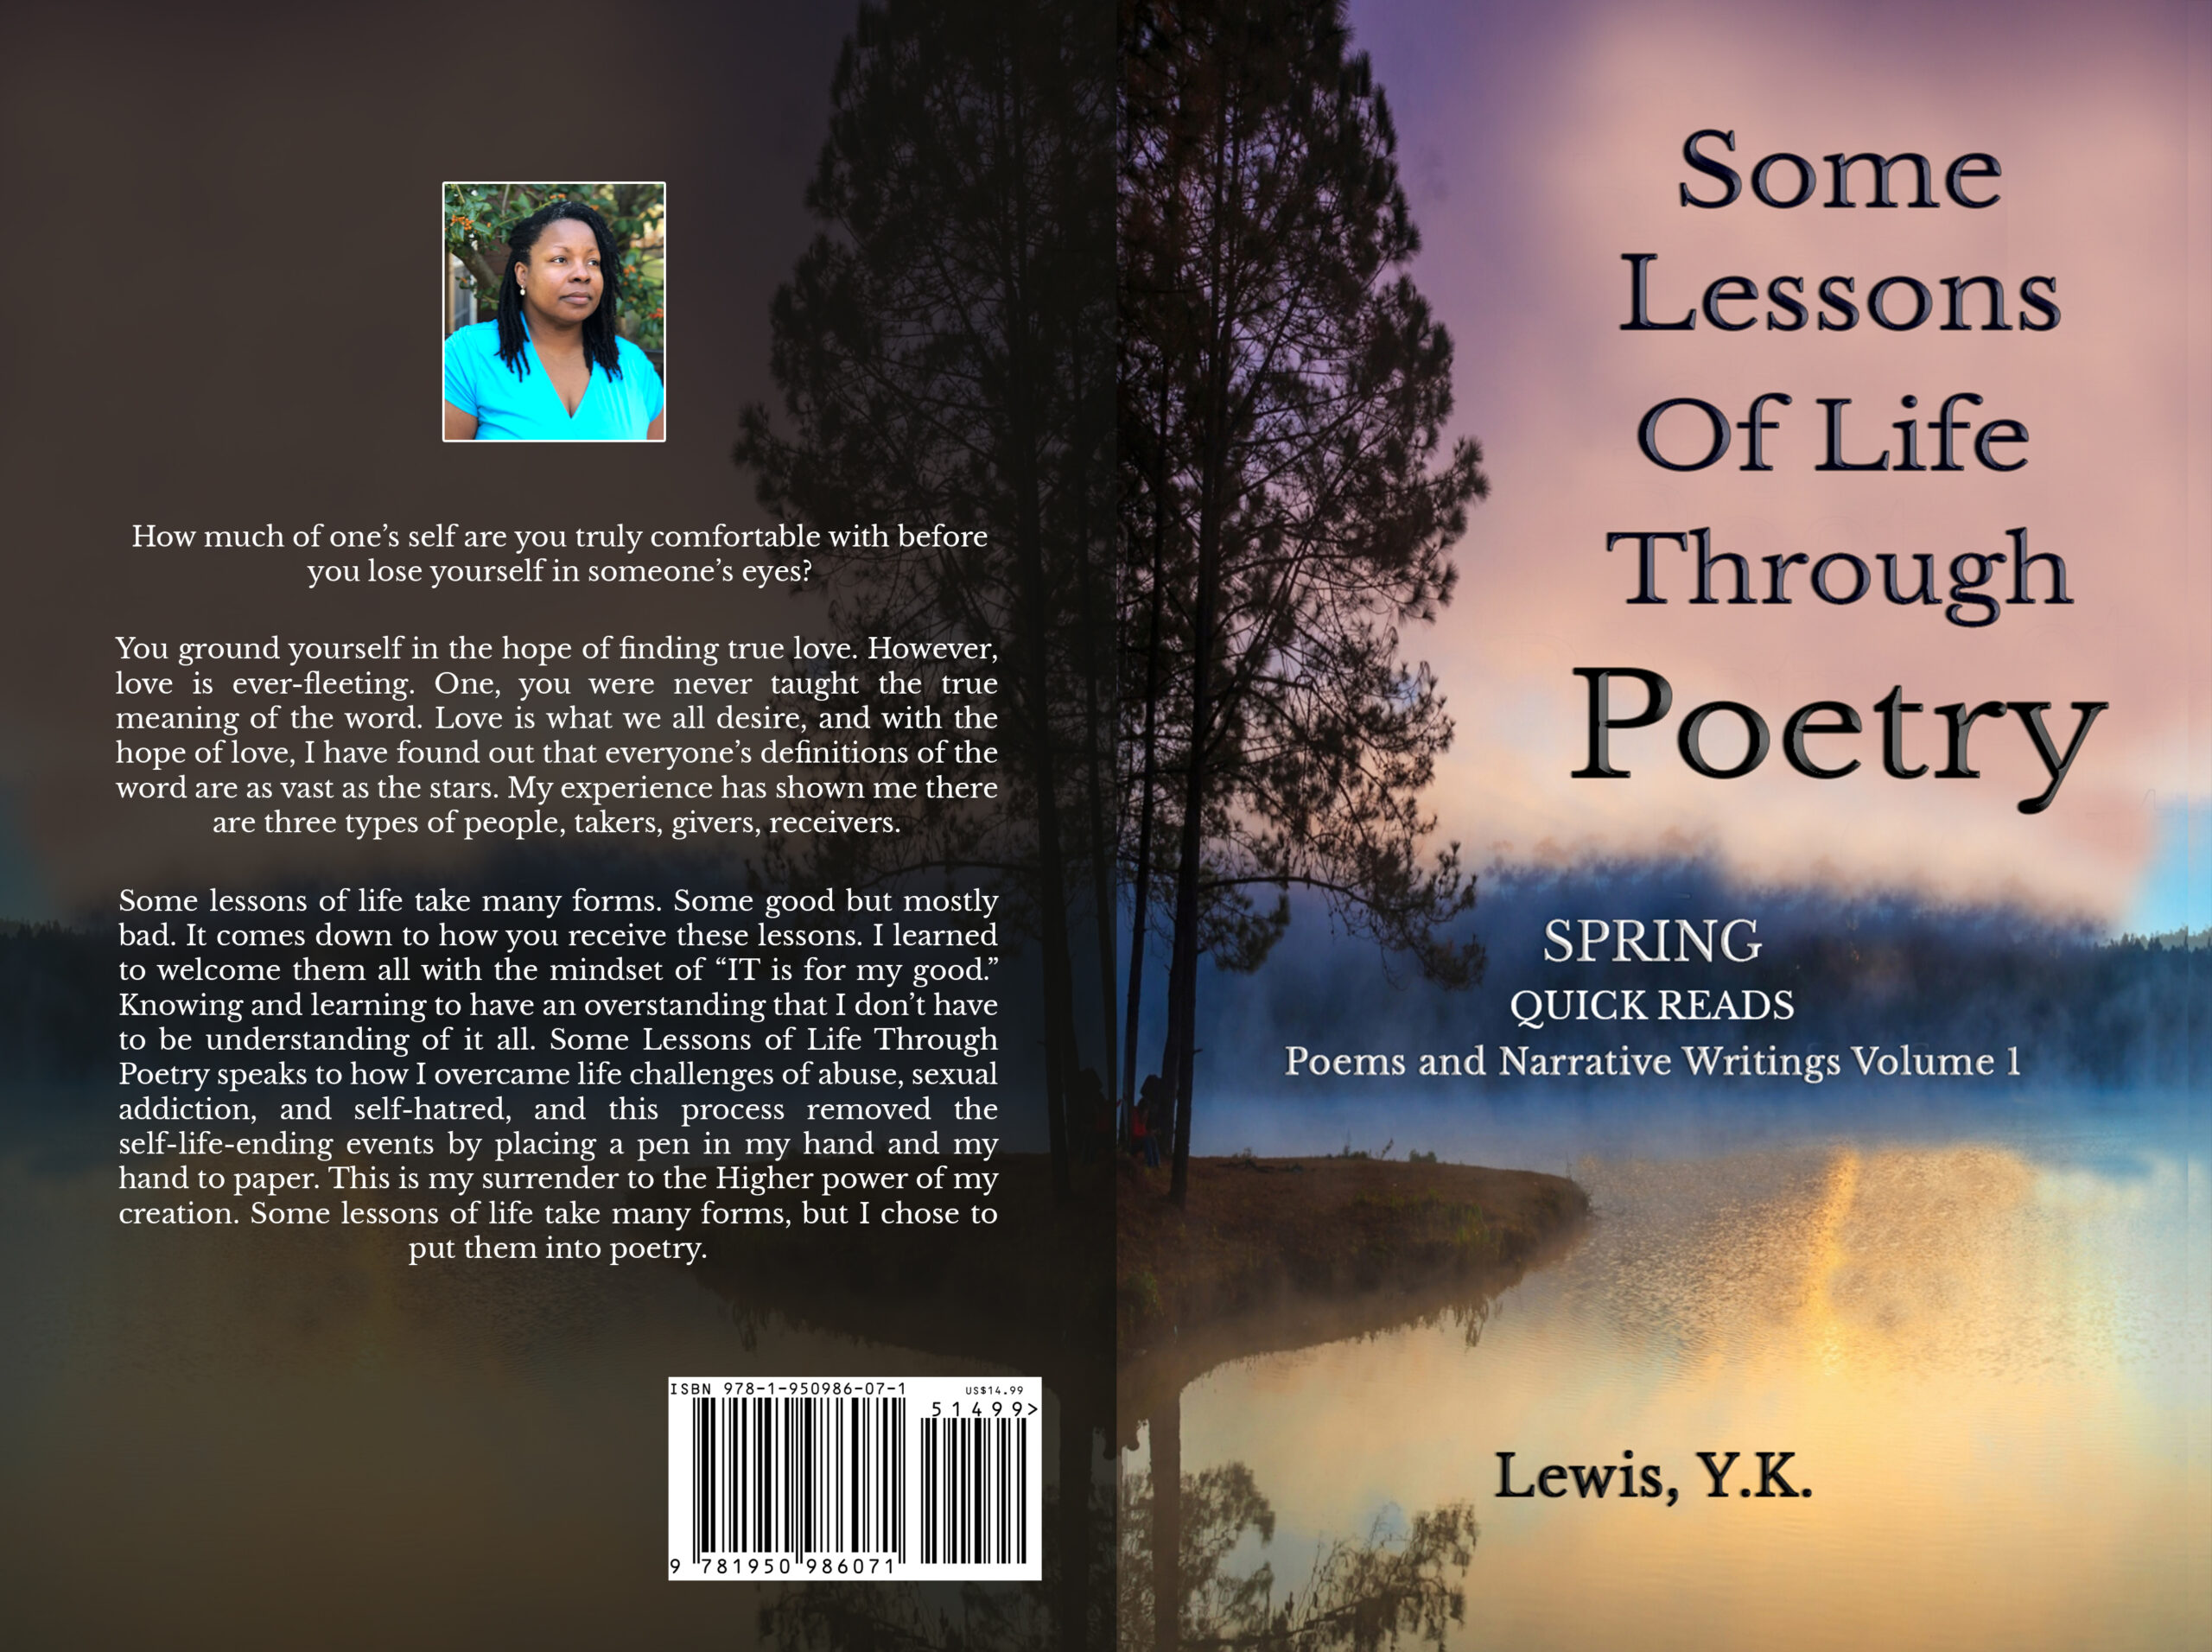 Some Lessons of Life Through Poetry by Lewis, Y.K